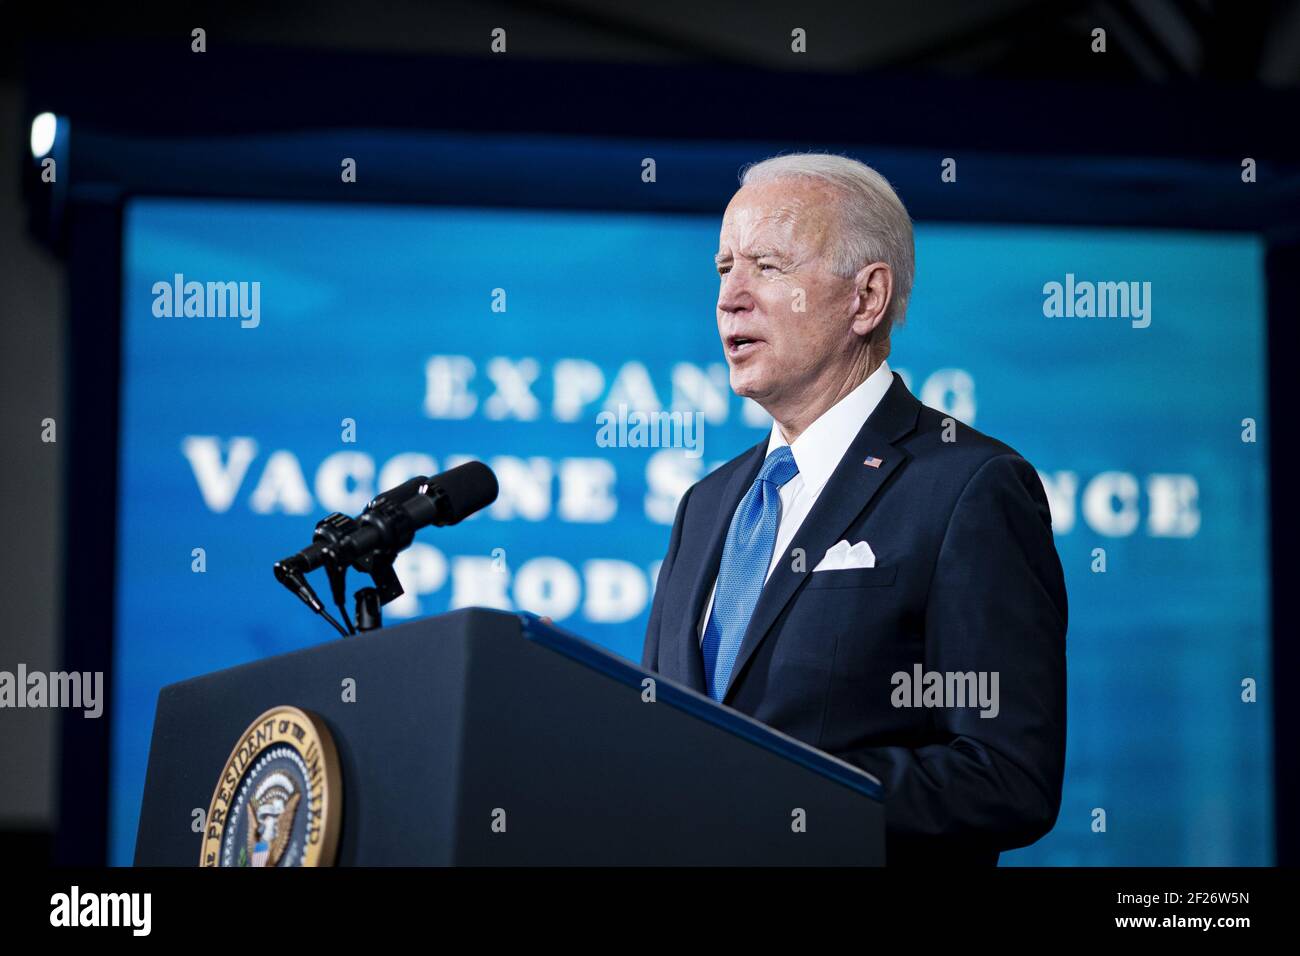 Washington, United States. 10th Mar, 2021. U.S. President Joe Biden speaks during an event in the Eisenhower Executive Office Building in Washington, DC on Wednesday, March 10, 2021. Biden will double the U.S. order of Johnson & Johnson's one-shot vaccine, seeking another 100 million doses, bringing bringing the country's total vaccine supply to enough for 500 million people. Photo by Al Drago/UPI Credit: UPI/Alamy Live News Stock Photo